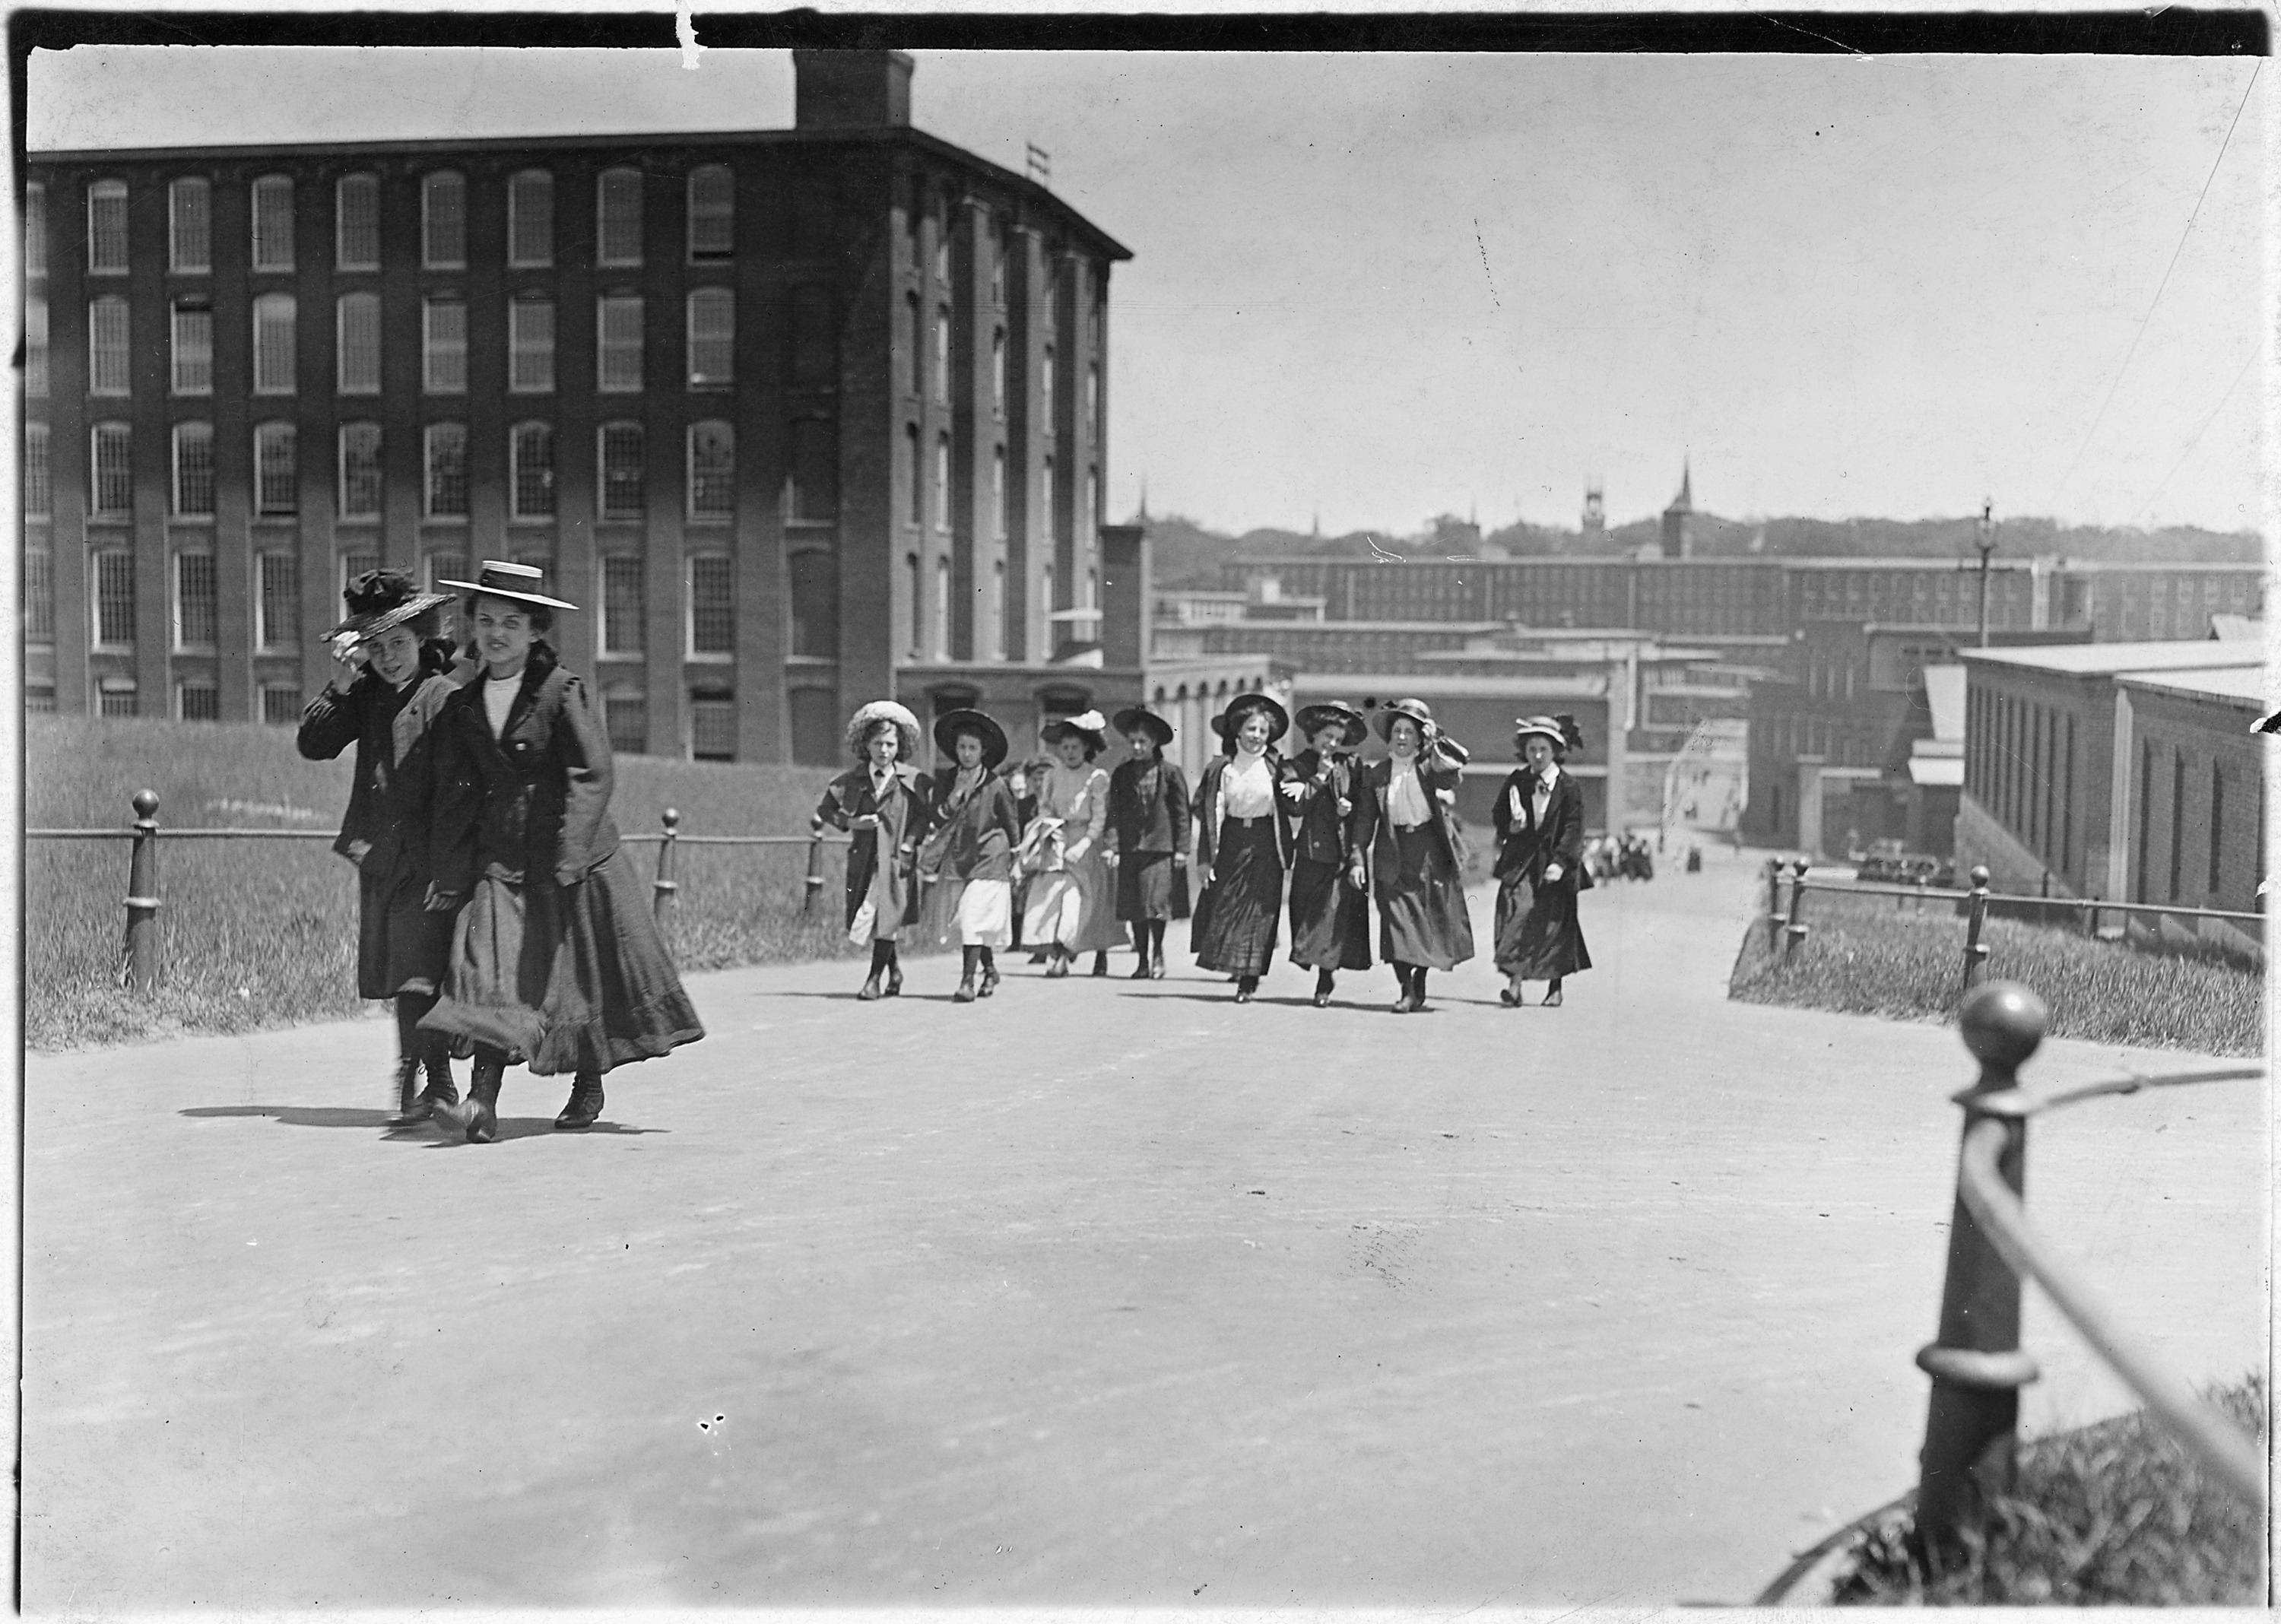 Some of the girls who work in Amoskeag Mills. Manchester, N.H. - NARA - 523201